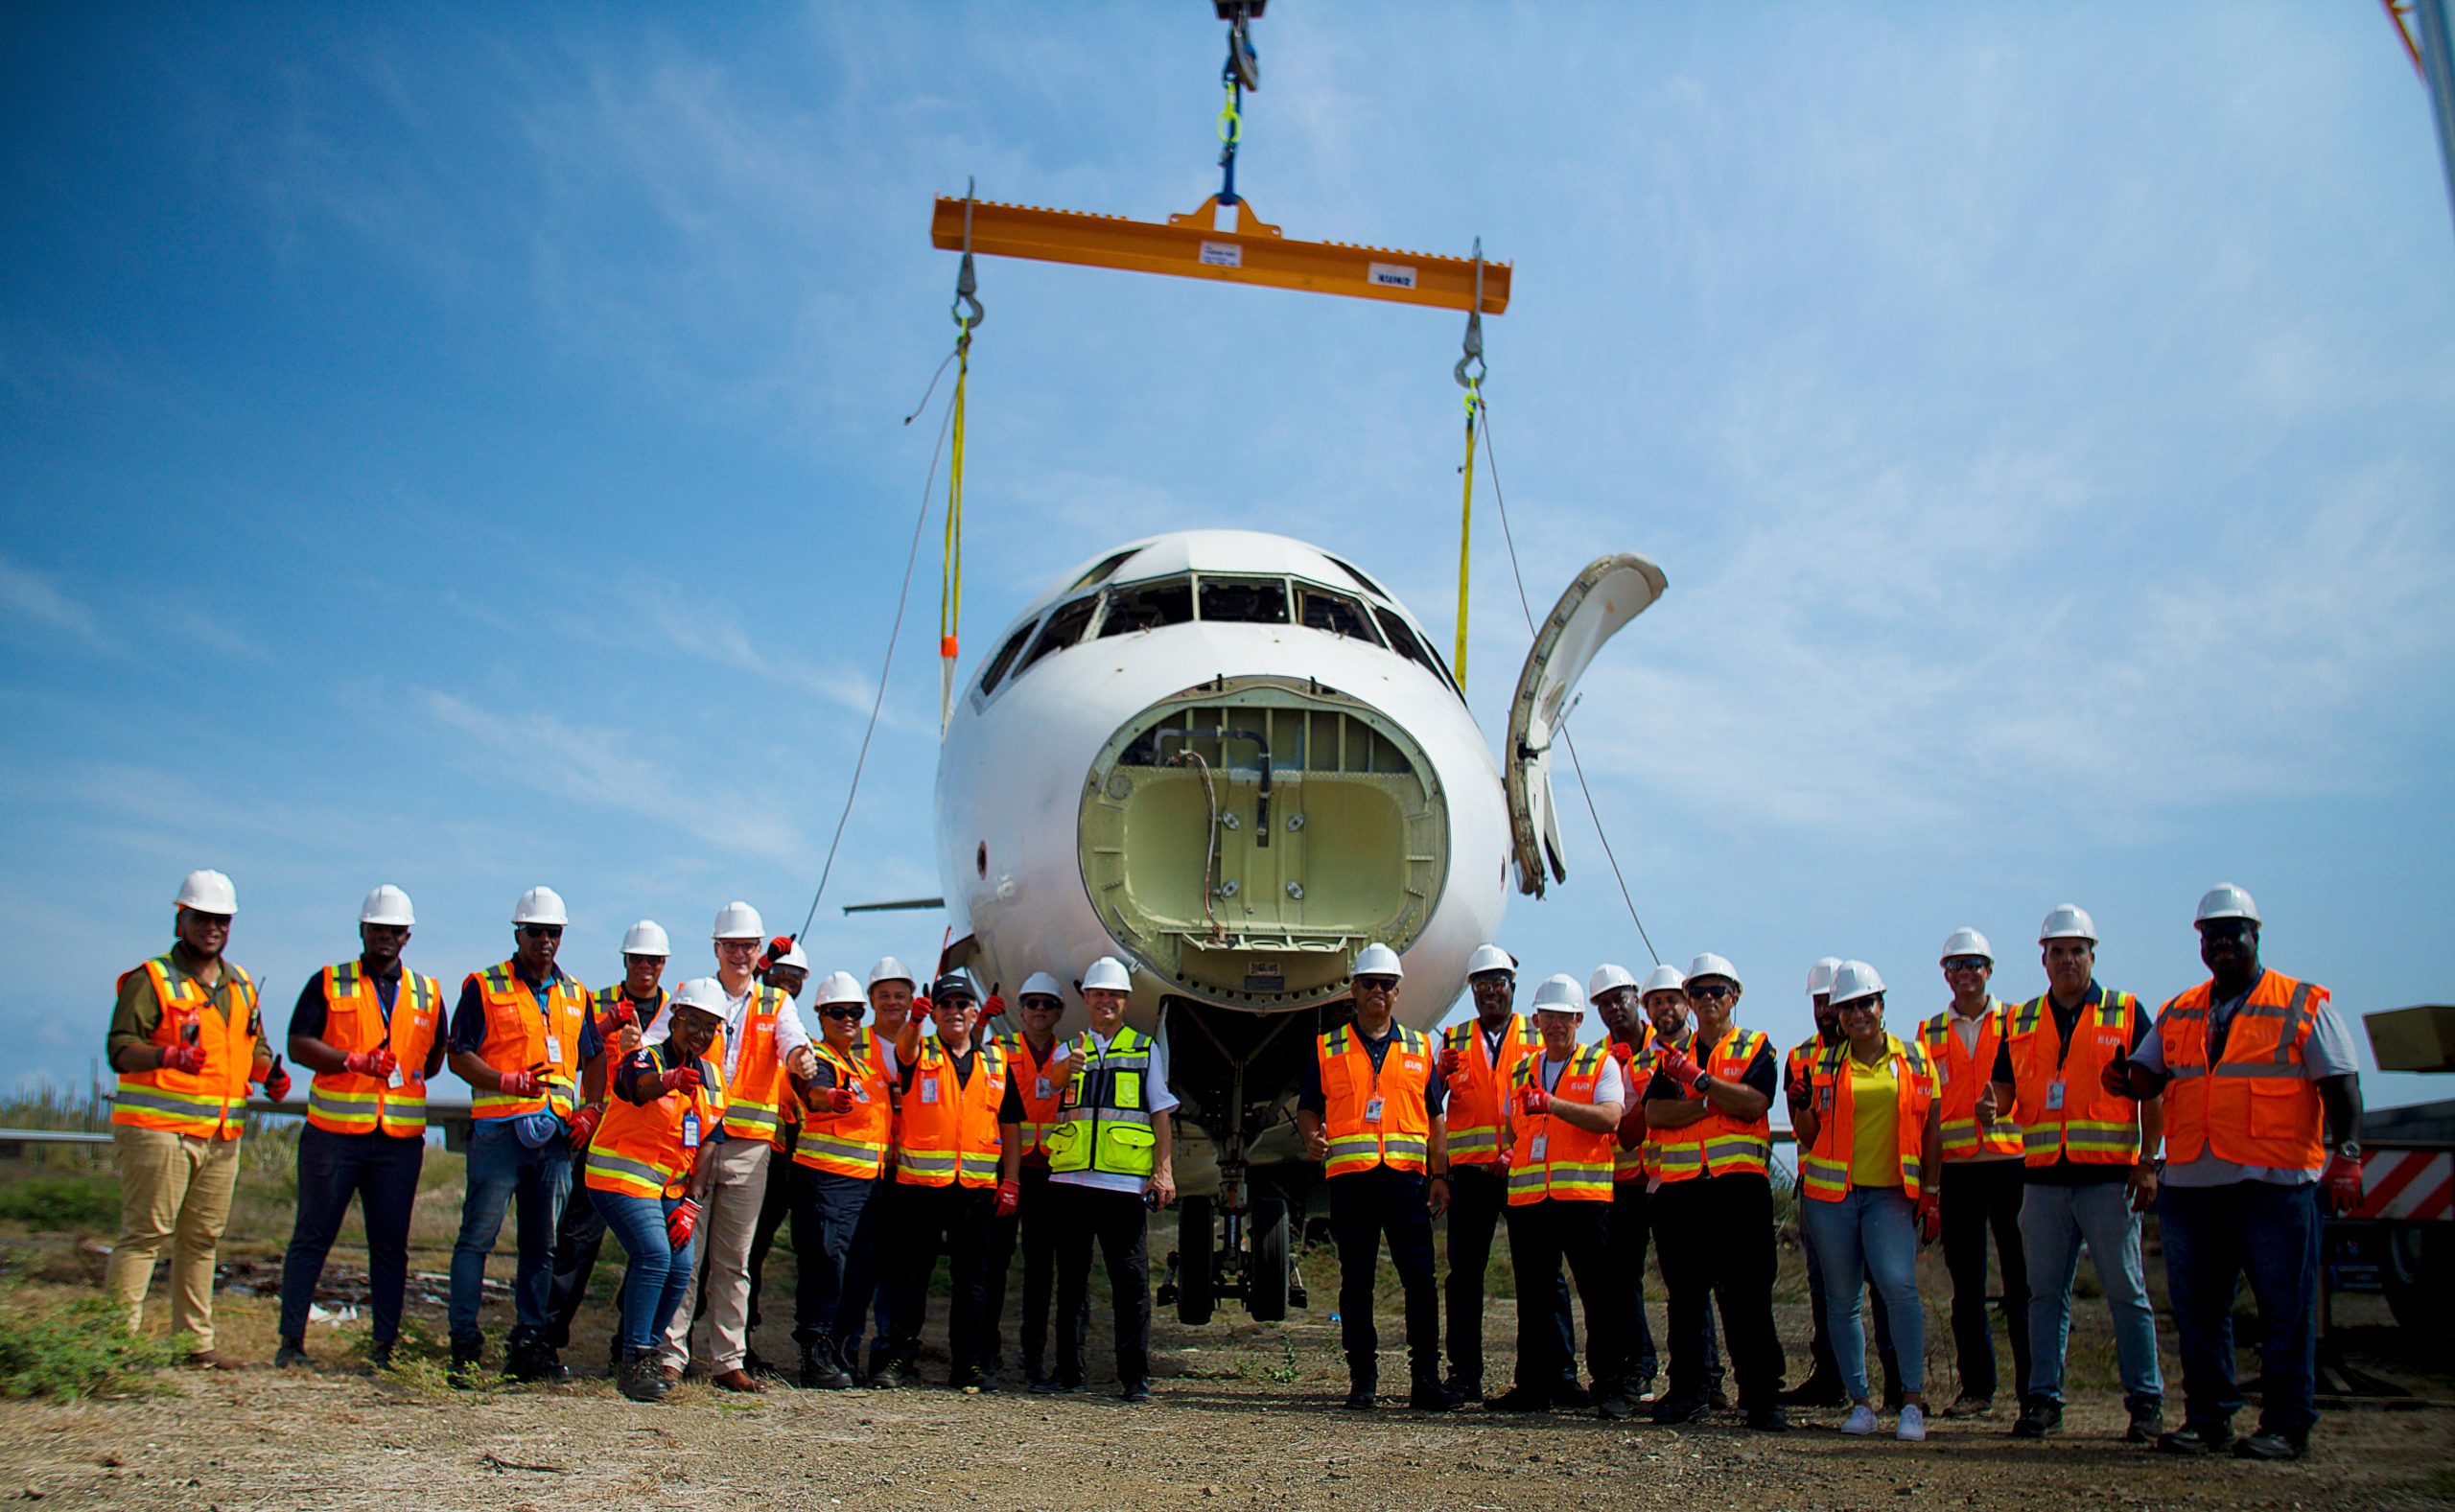 Successful conclusion of weeklong Aircraft Recovery training at CUR